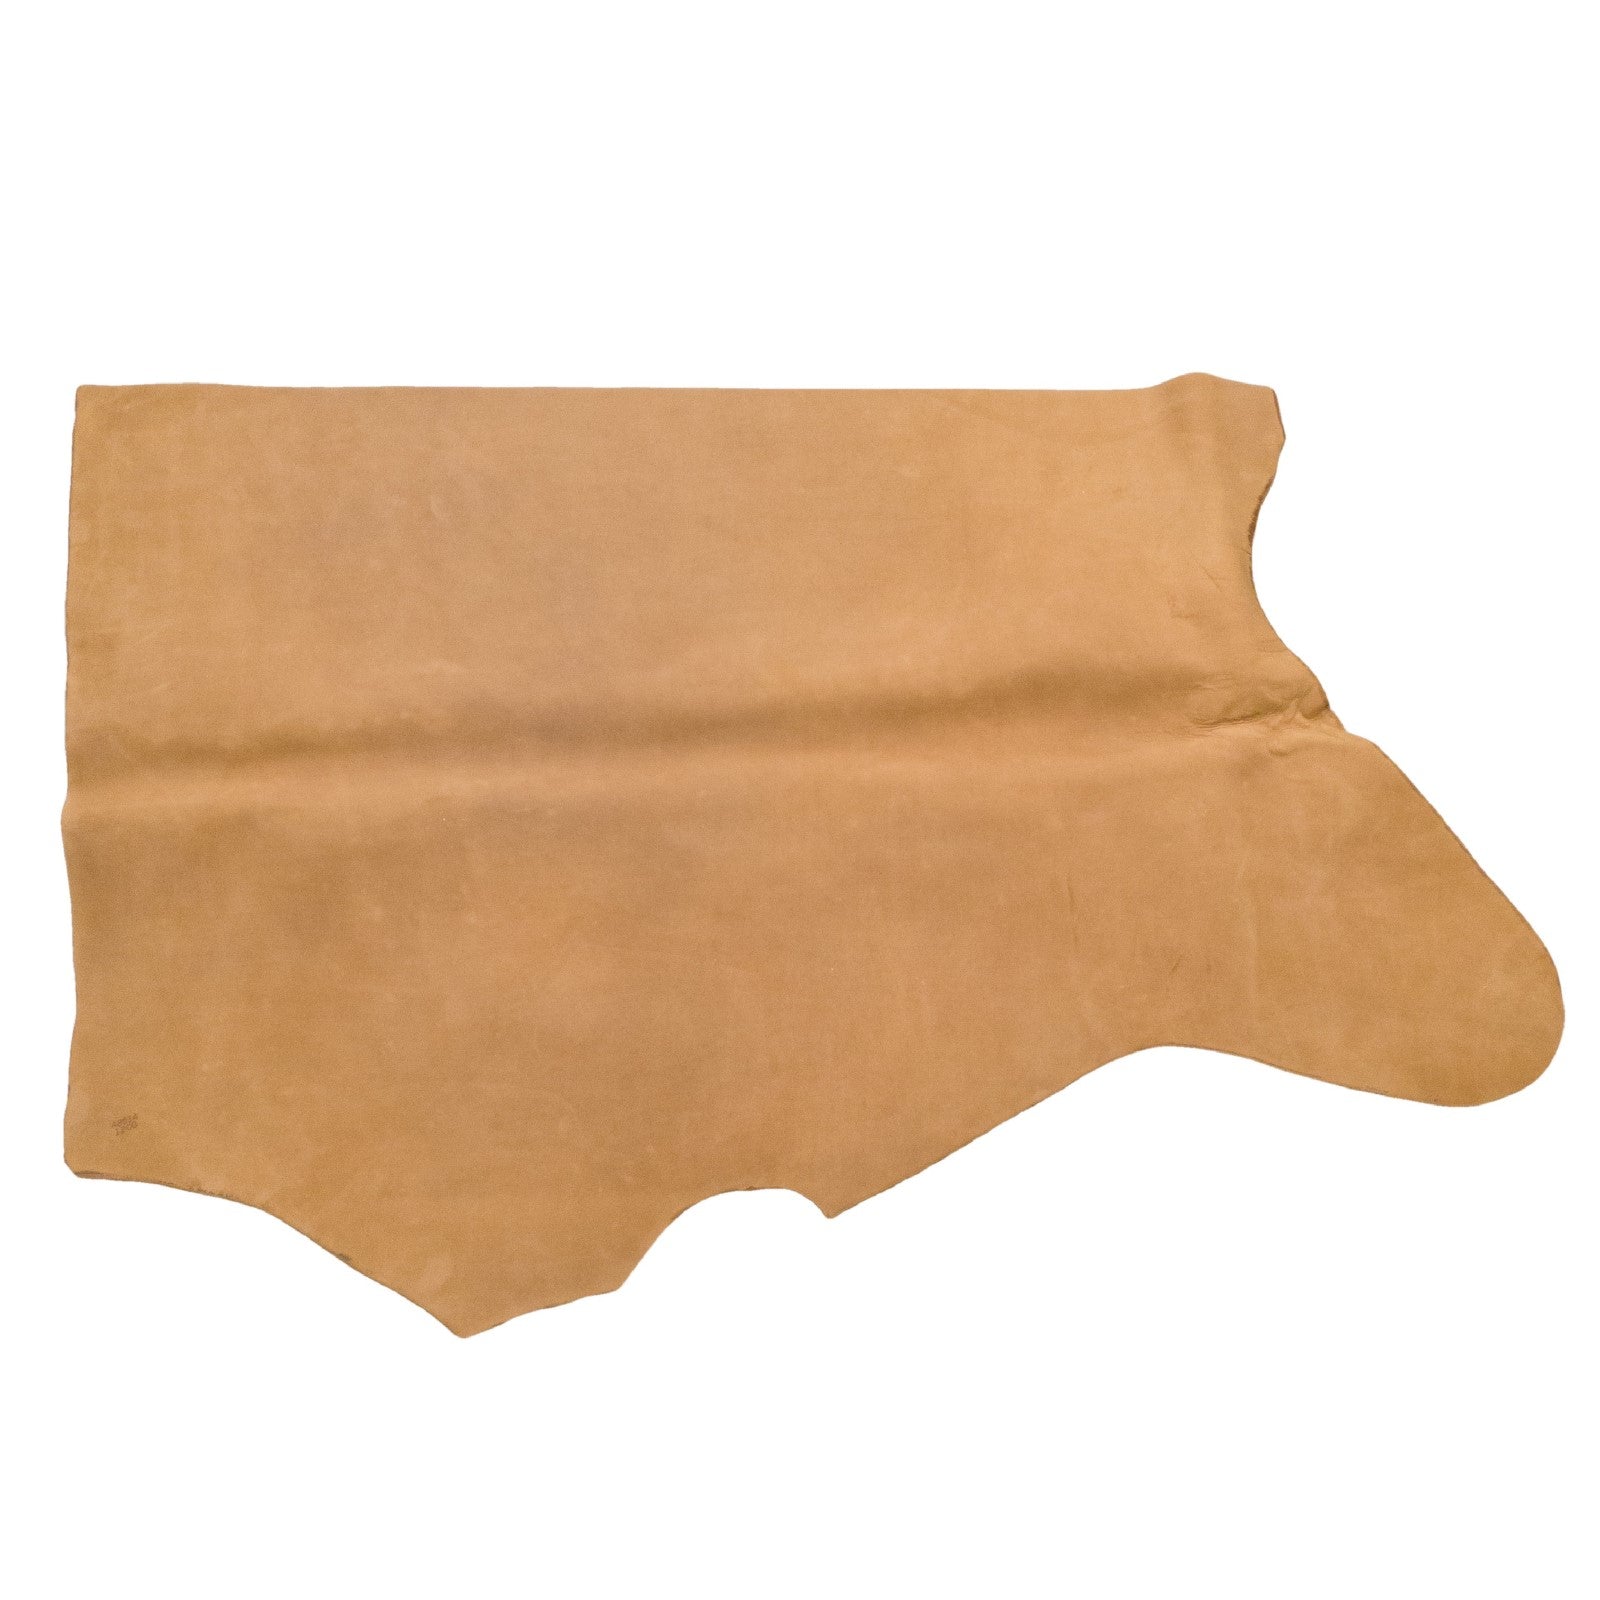 Hillfire (Acorn), SB Foot, Non-stock, 5-6oz, Oil Tanned Hides, Bottom Piece / 6.5 - 7.5 Sq Ft | The Leather Guy